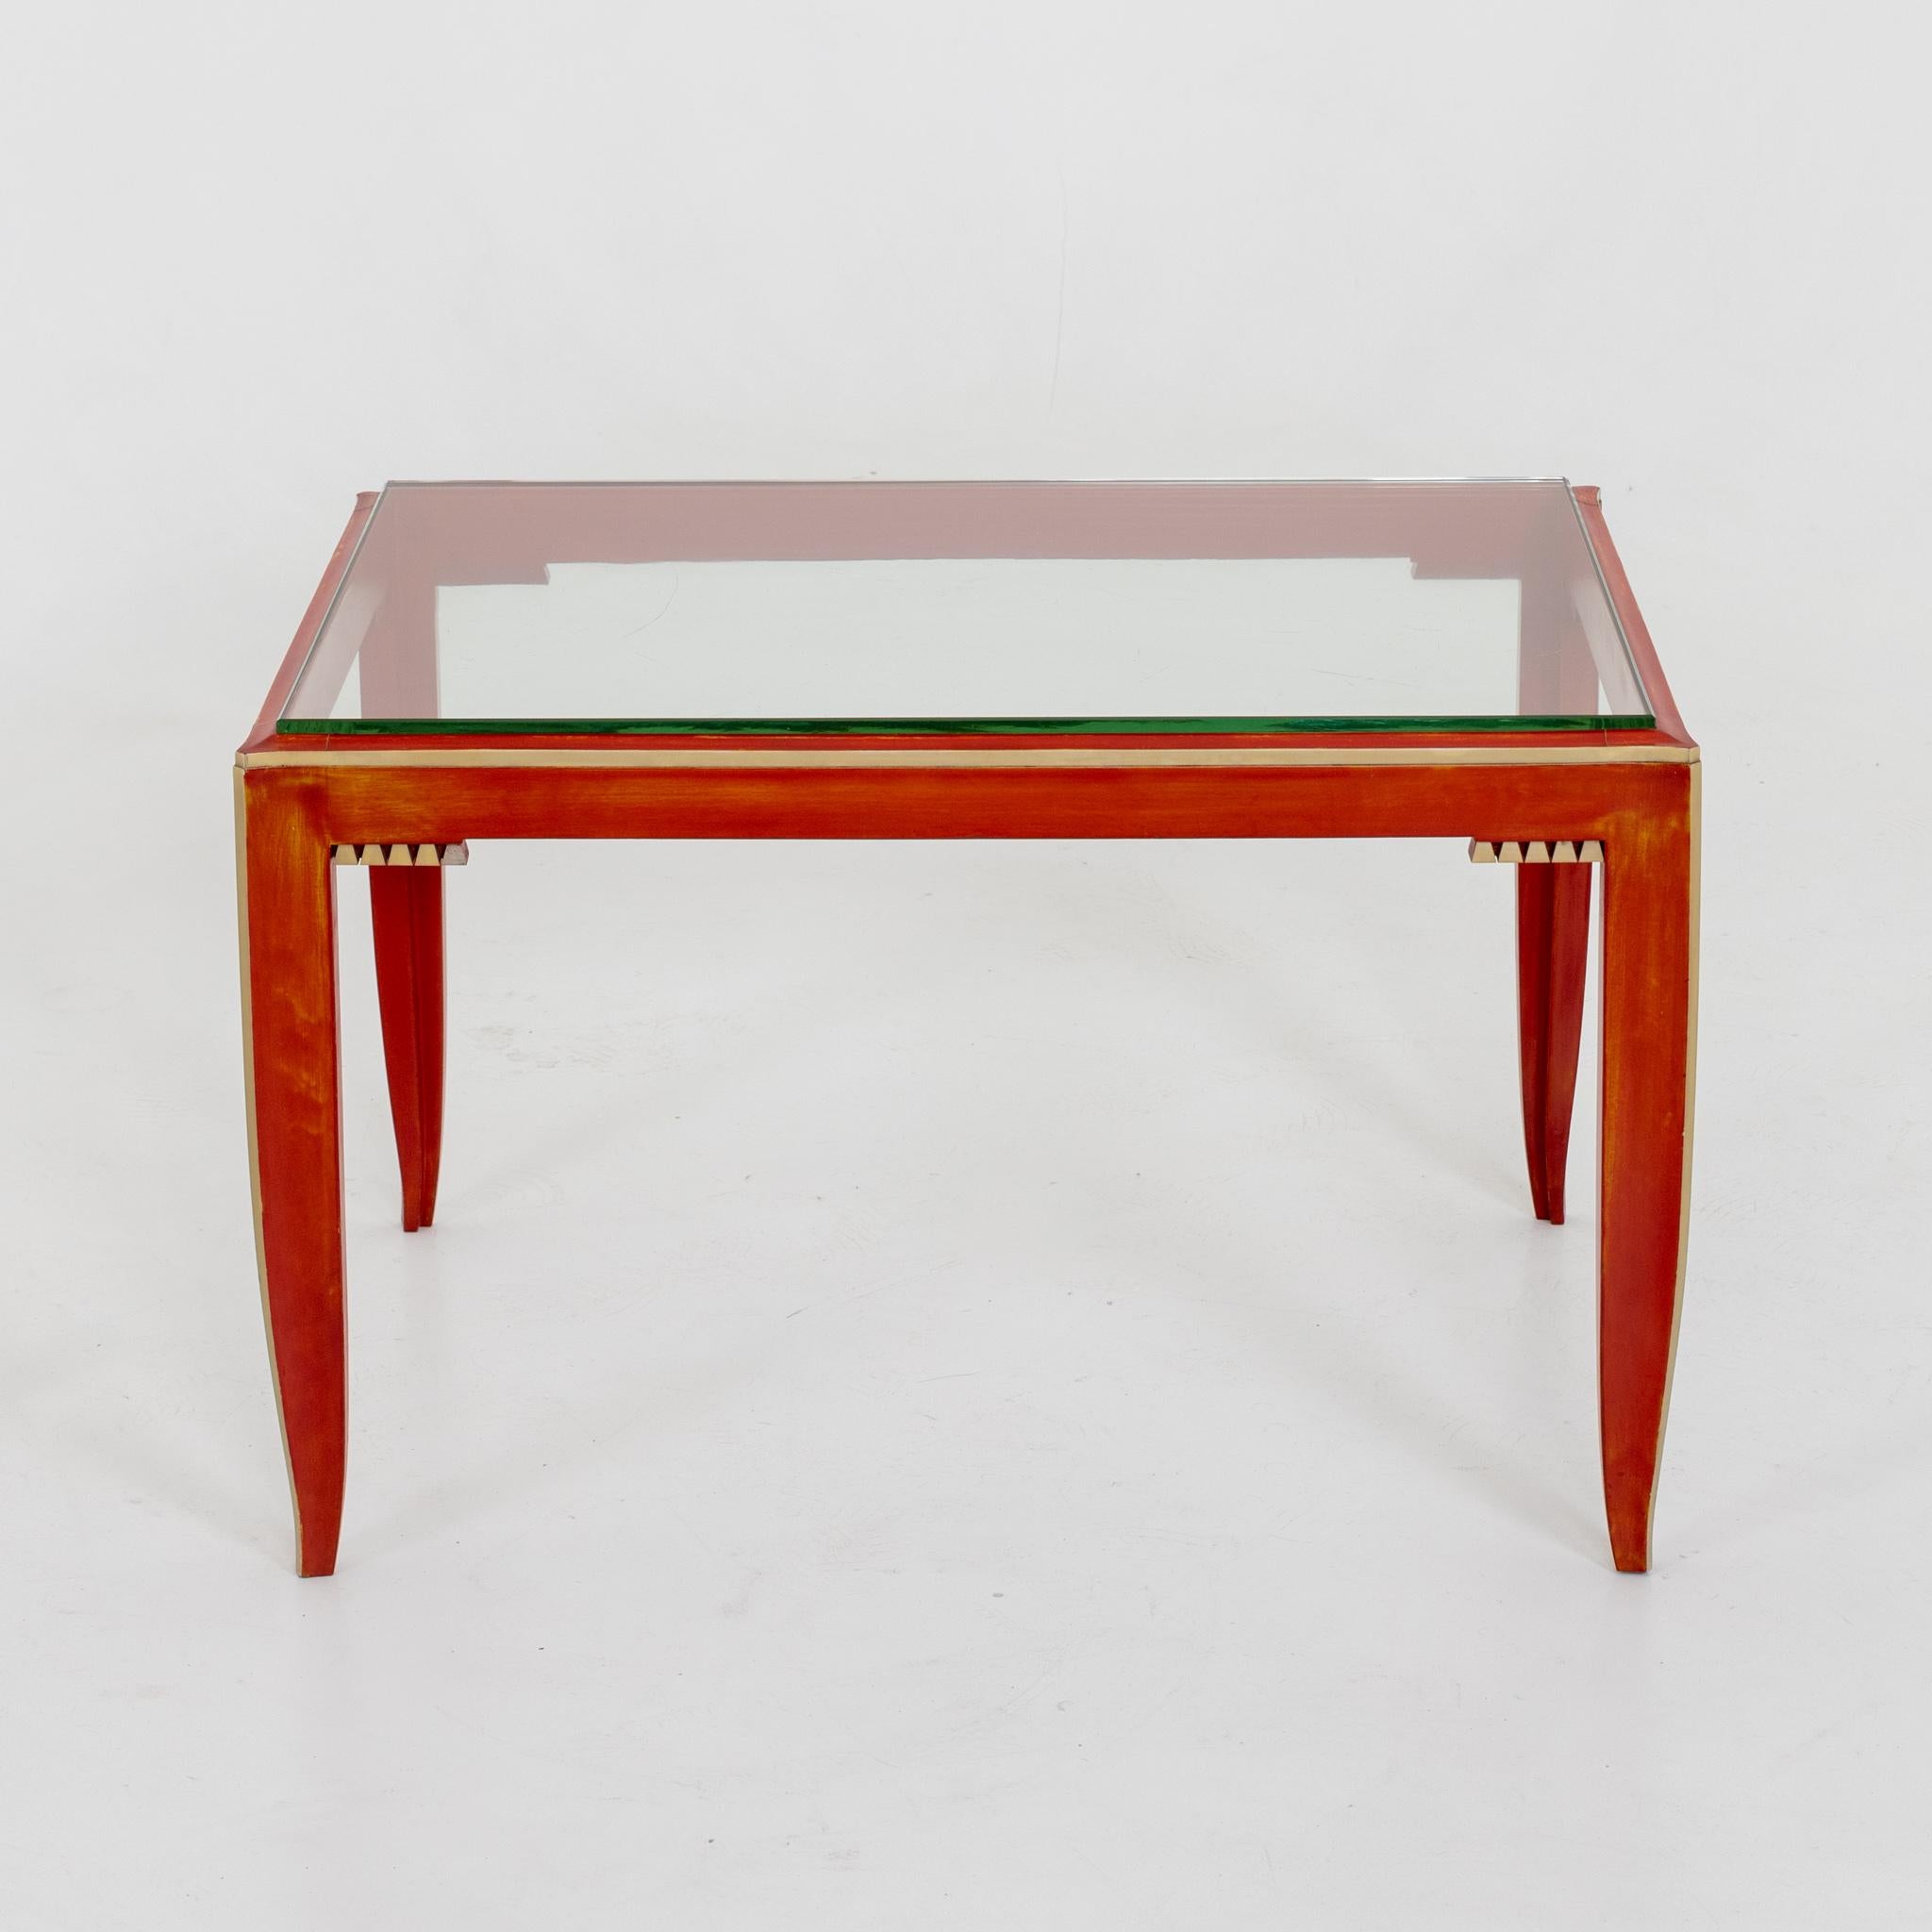 Maison Franck Art Deco cocktail table. Red painted wood with original crystal glass top. Originally ordered in 1938 by Romi Goldmuntz ,owner of a important diamond company in Antwerp , Belgium. This suite of furniture along with a desk and cabinet